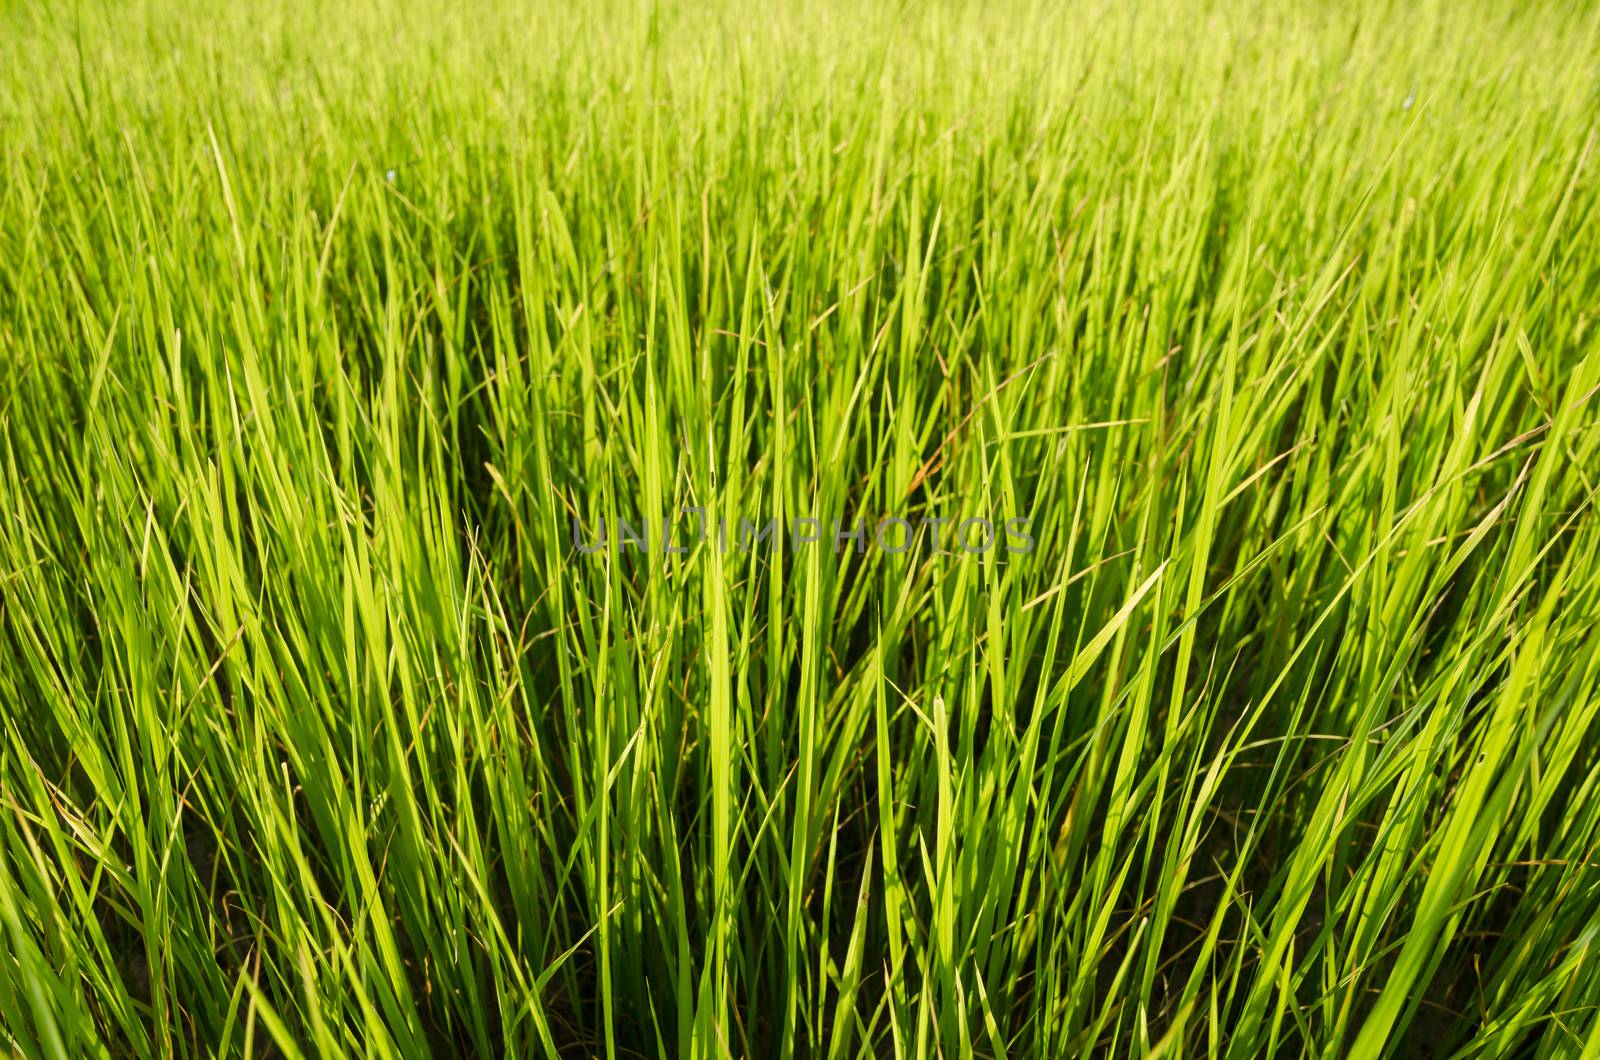 Green grass meadow field in the rice field Thailand background